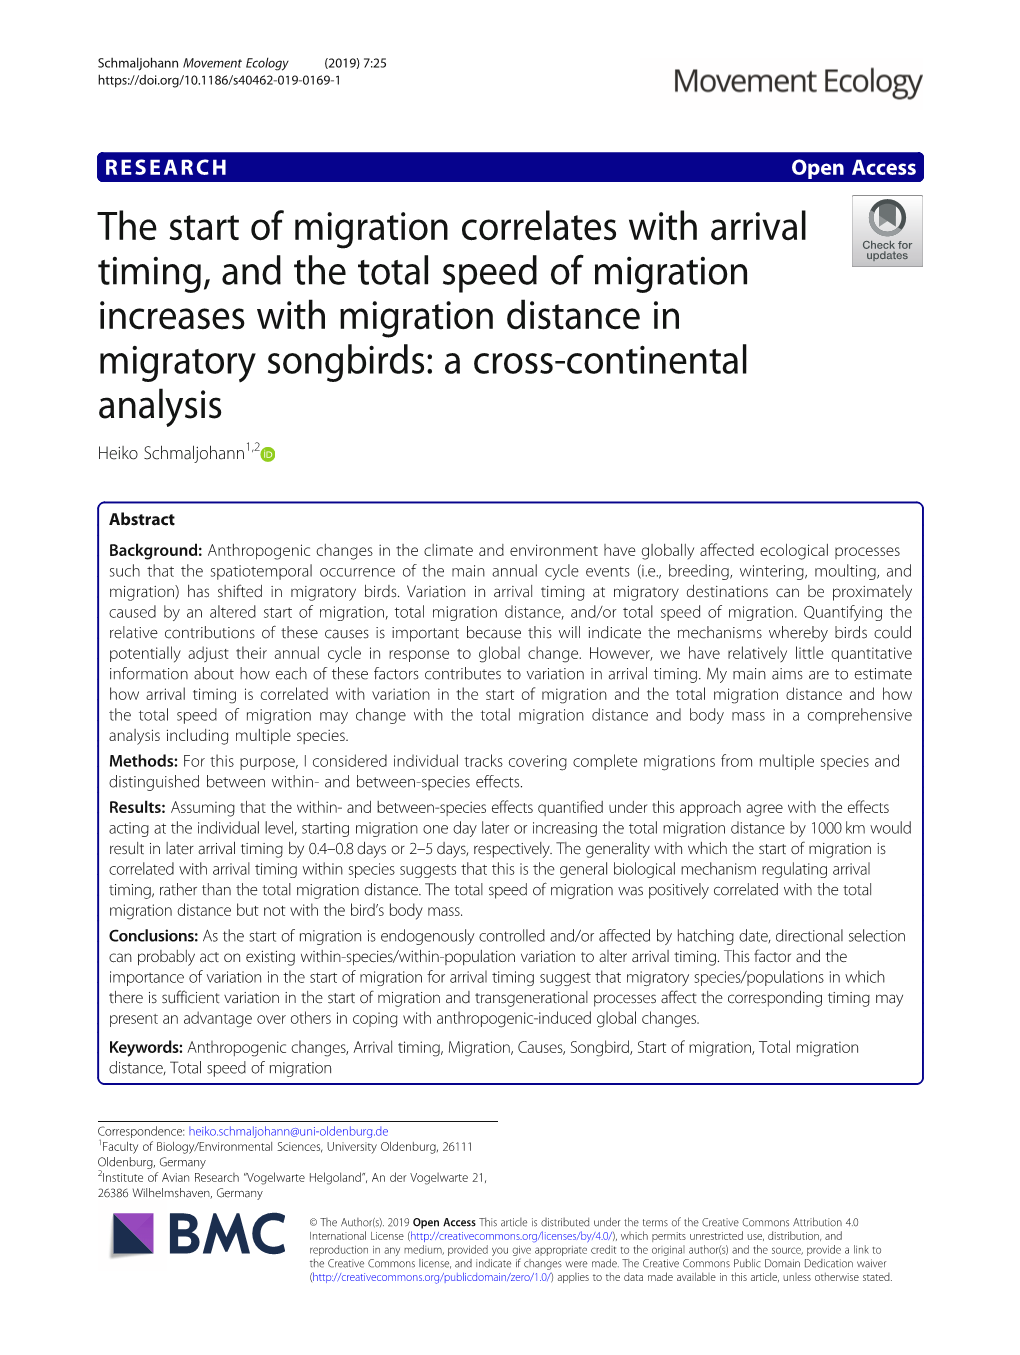 The Start of Migration Correlates with Arrival Timing, and the Total Speed Of